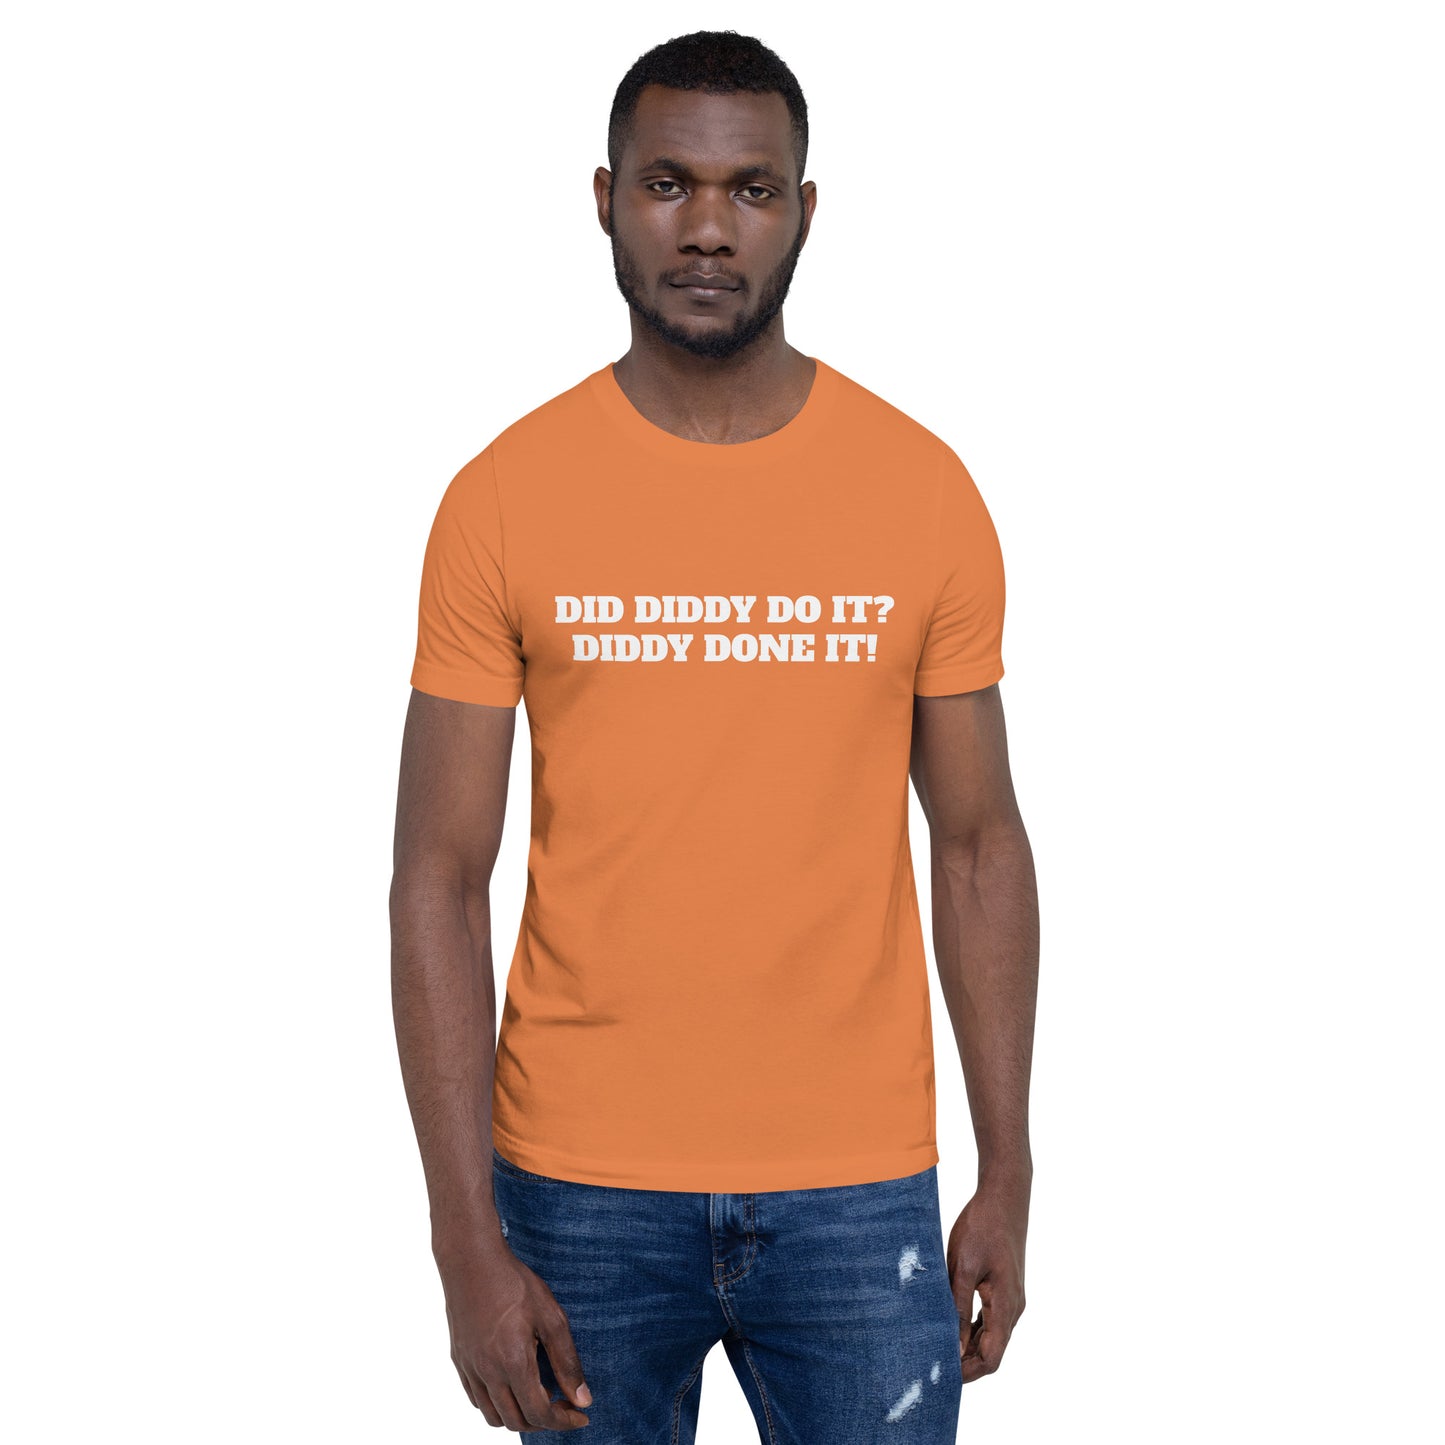 DID DIDDY DO IT? Unisex t-shirt